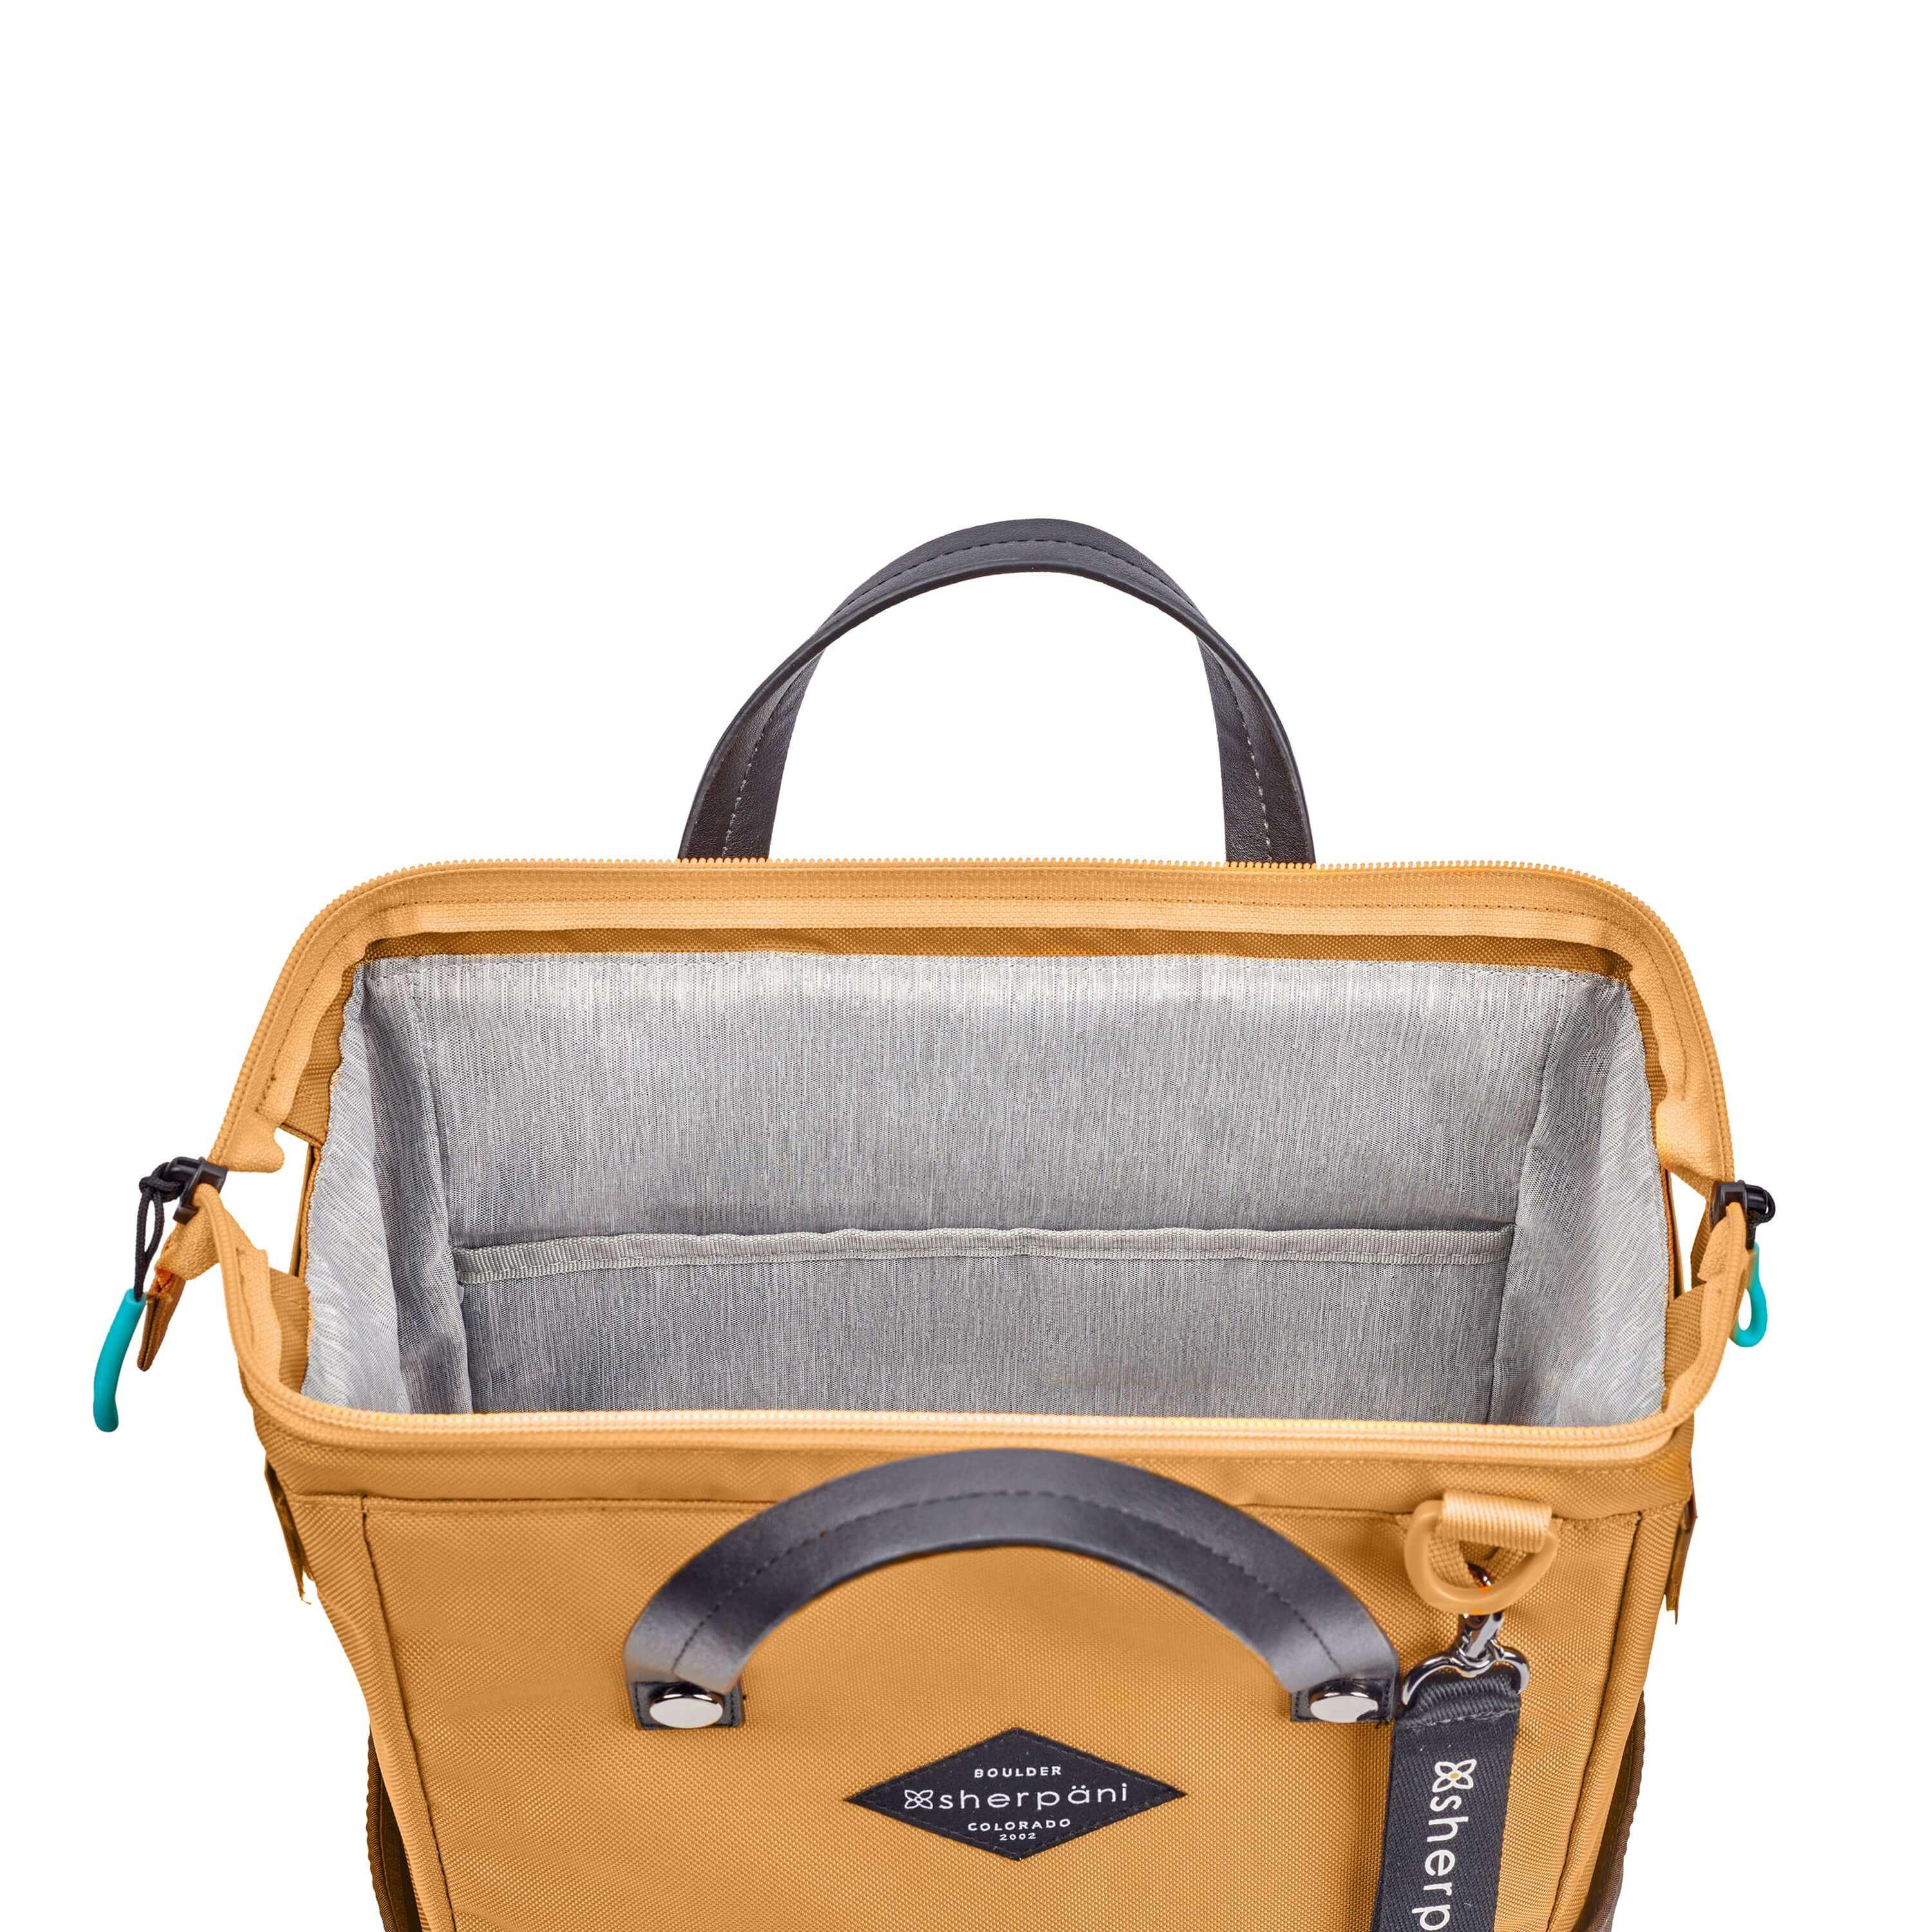 Top view of Sherpani three-in-one bag, the Dispatch in Sundial. The main zipper compartment is open to reveal a doctor bag style opening with a rectangular metal frame. The inside of the bag is light gray and features an internal pouch. 